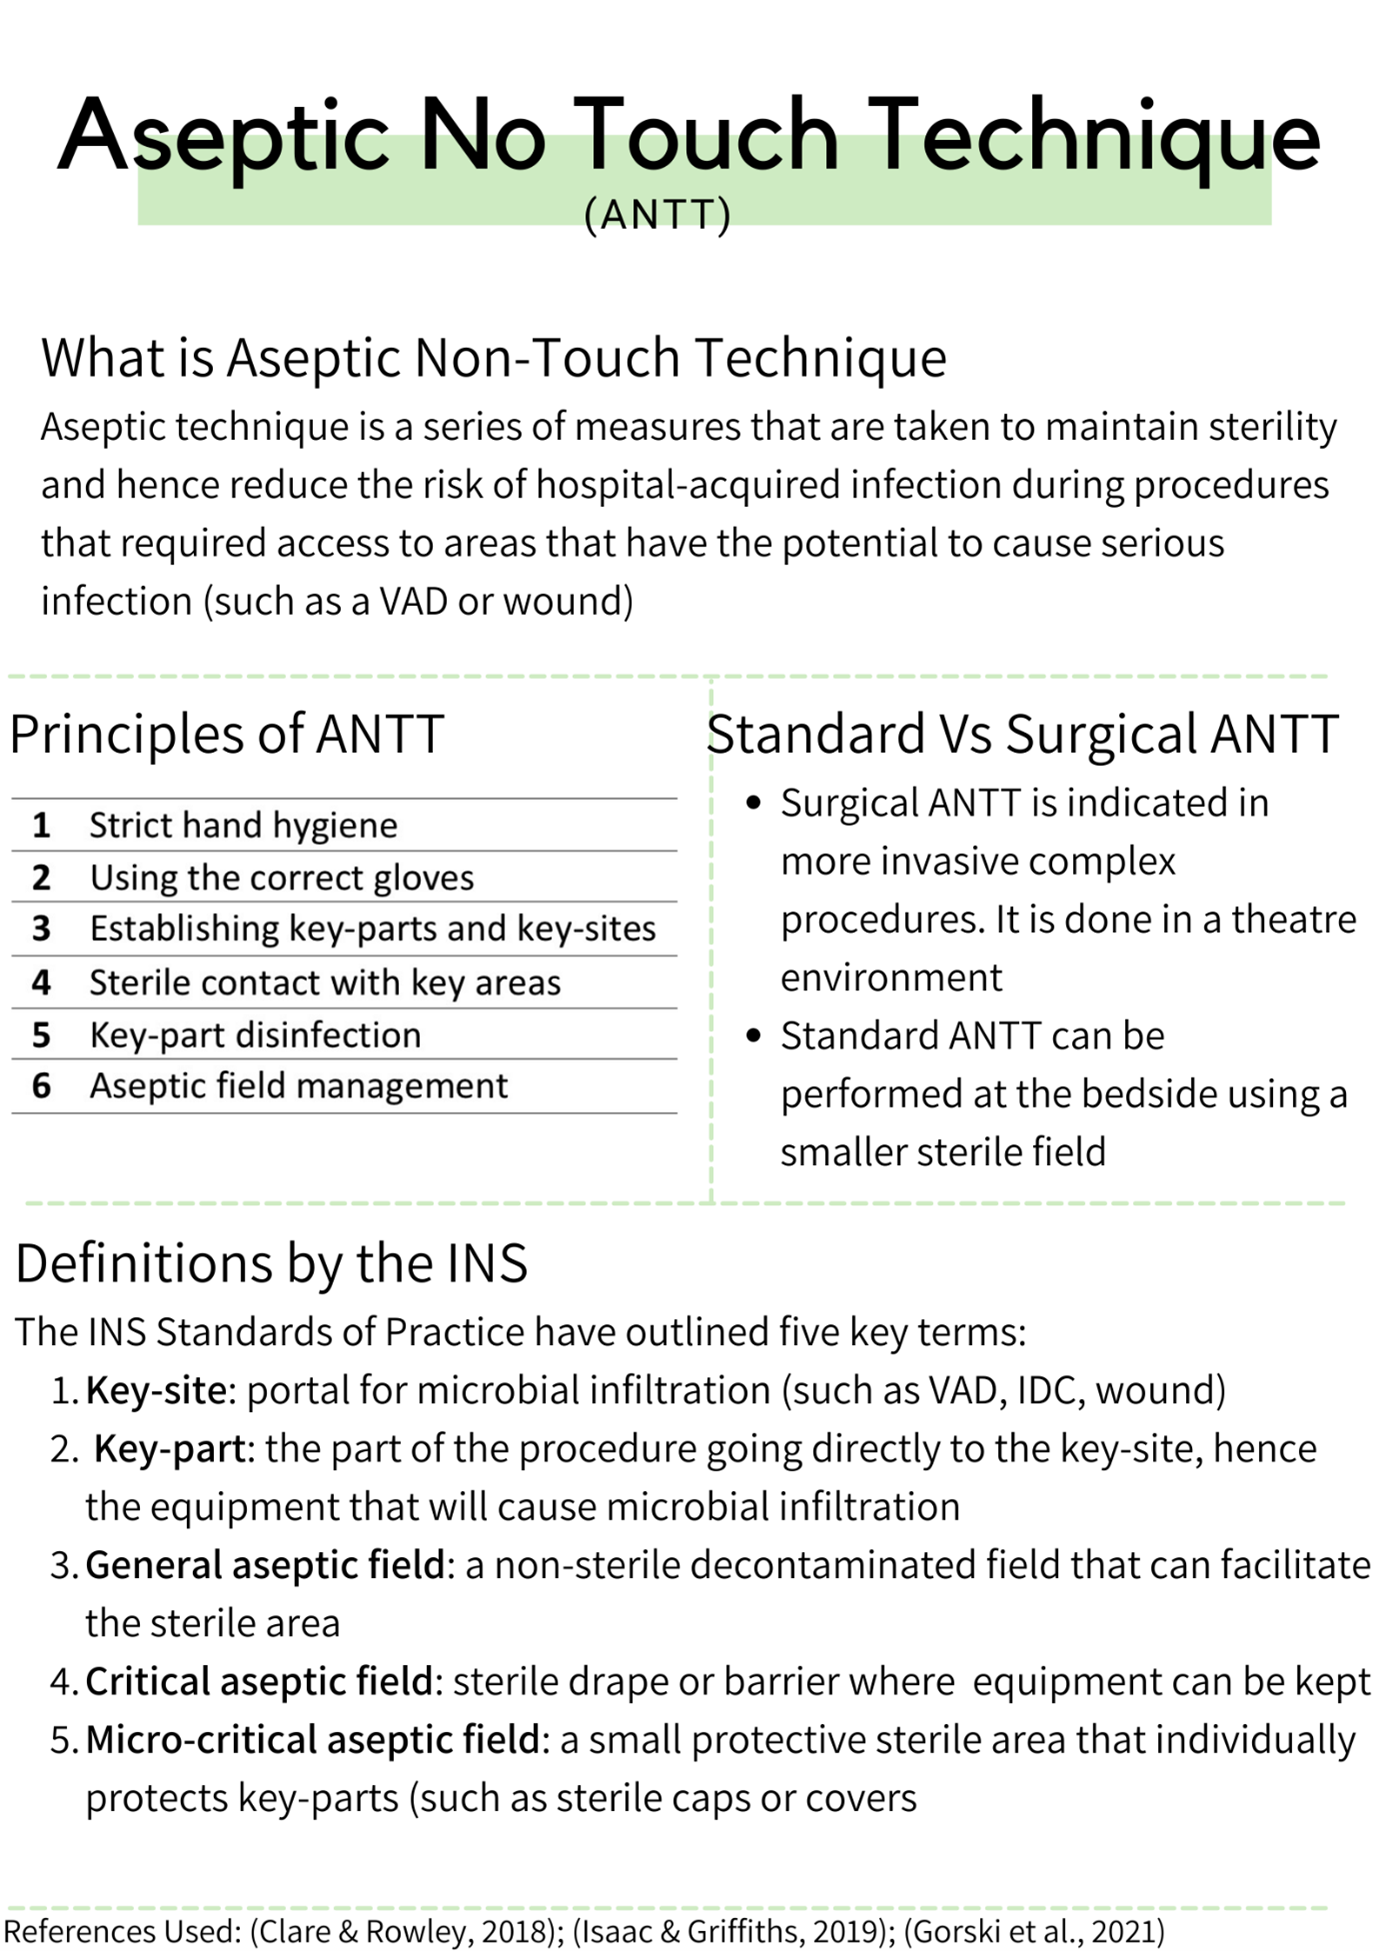 Aseptic non-touch technique (ANTT®)